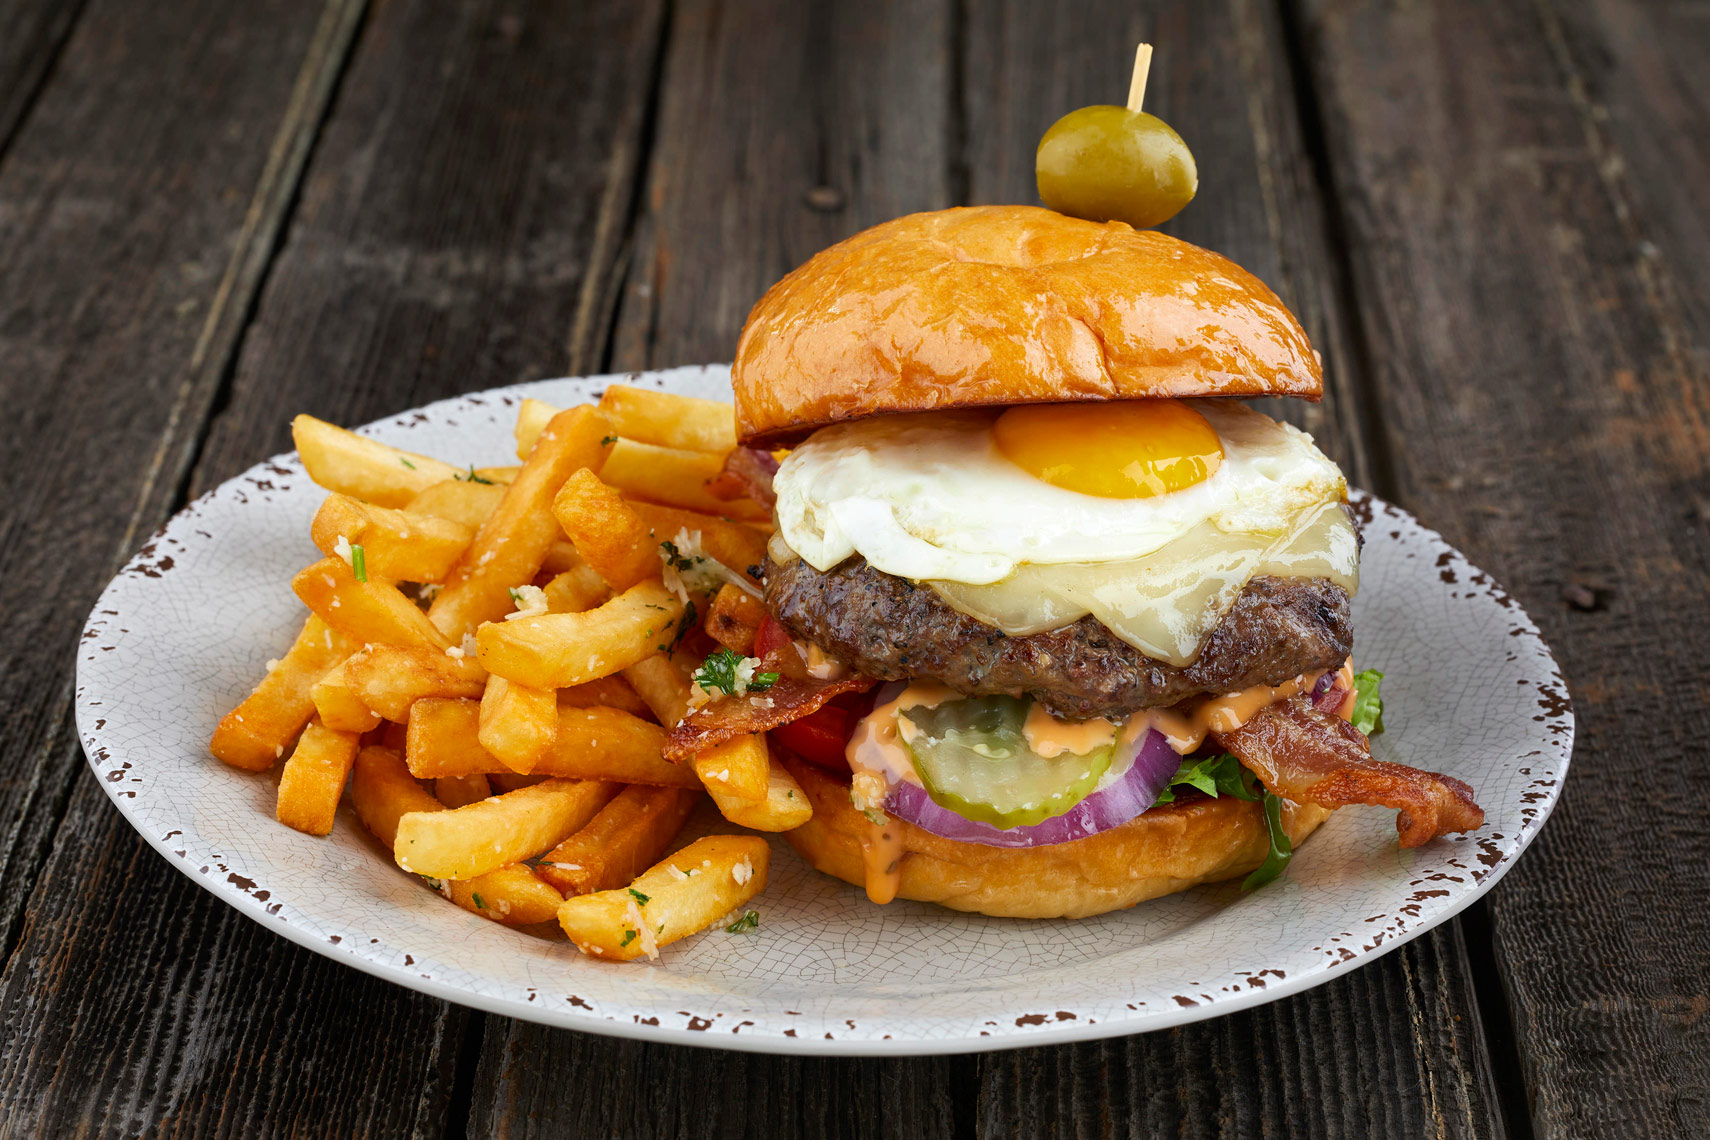 Bacon Cheeseburger With Fried Egg and French Fries